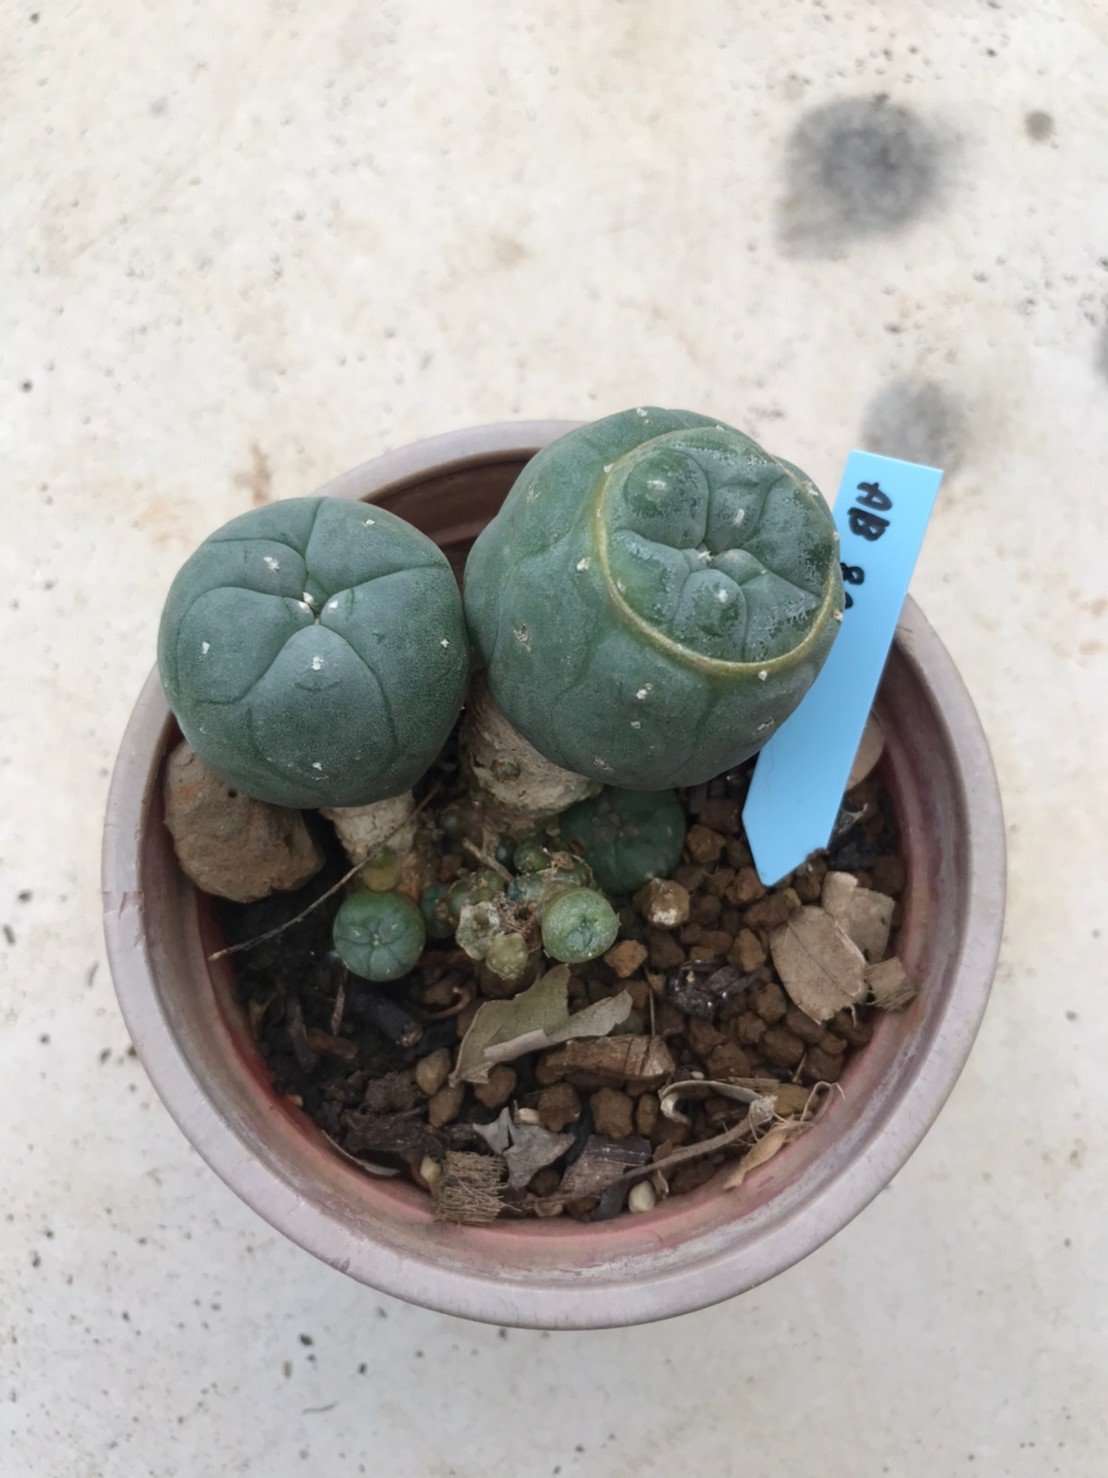 Lophophora williamsii 15 years old-grow from seed-can give flower and seed